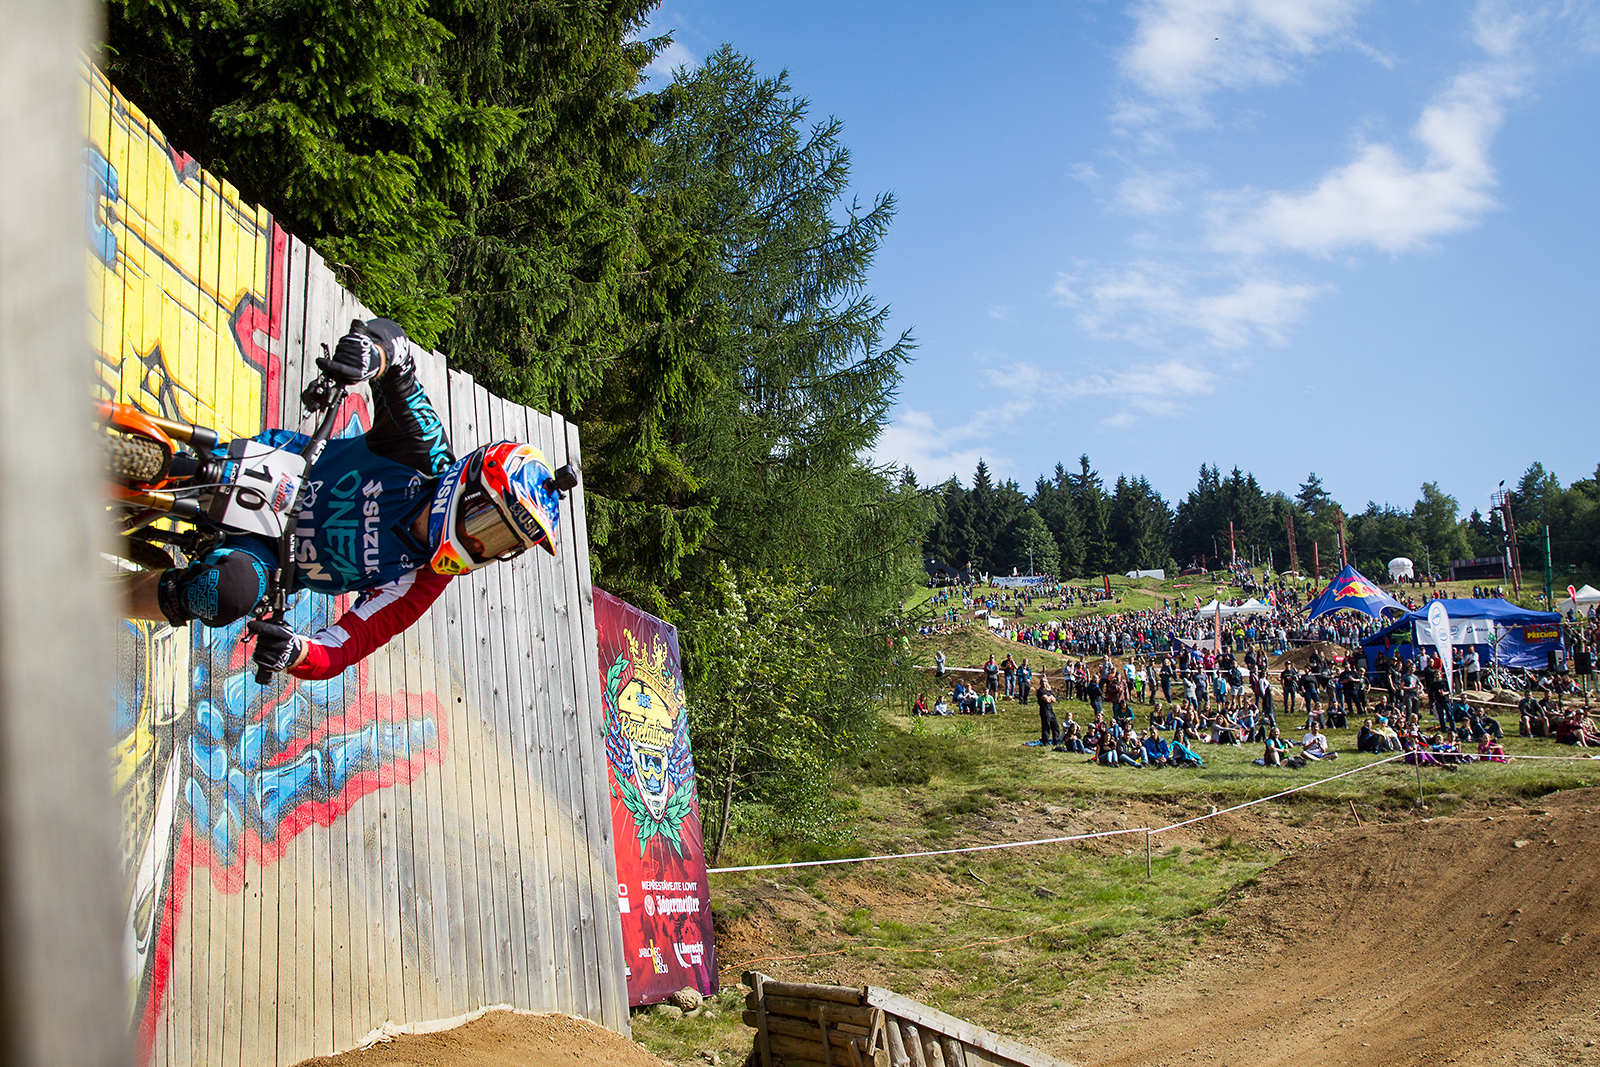 Rider introductions during round 4 of the 2017 4X Pro Tour at JBC Bike Park, Jablonec, Scotland, Czech Republic on July 15 2017. Photo: Charles A Robertson